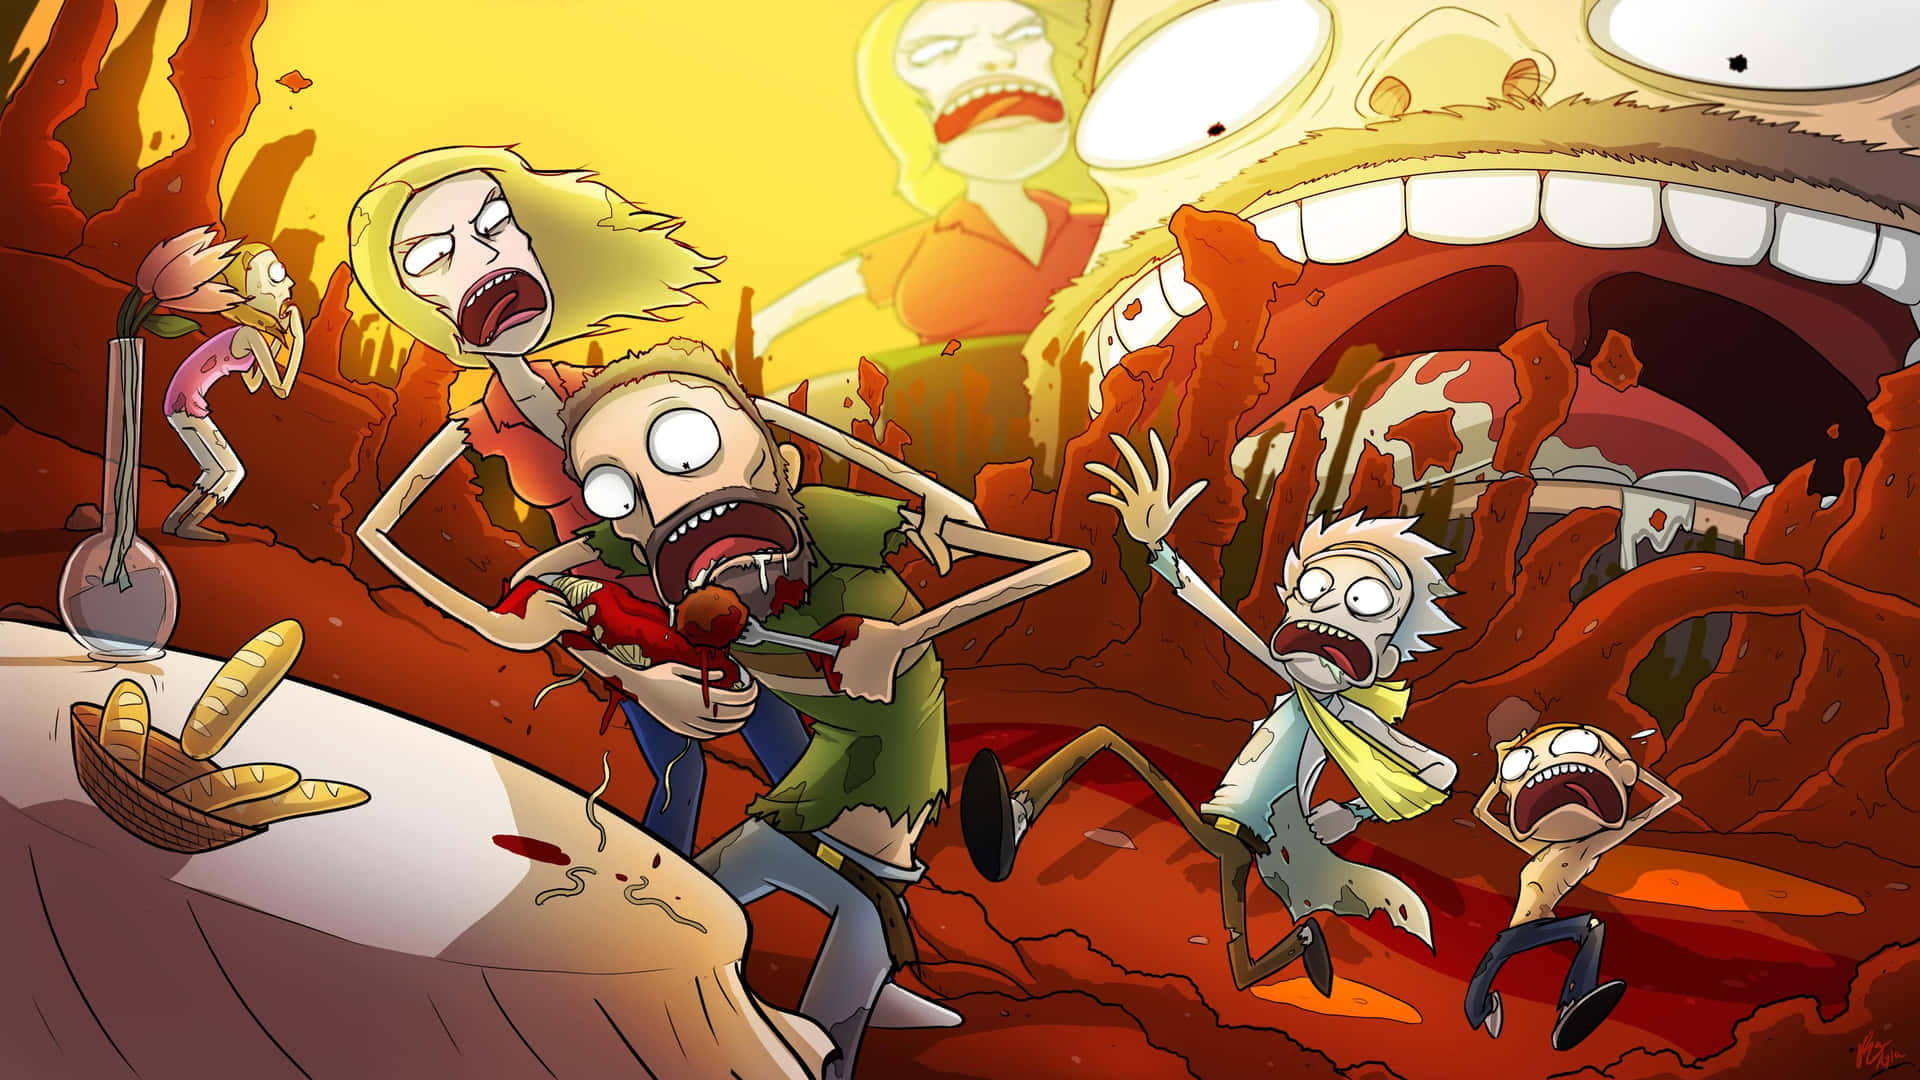 "The Rick and Morty reunion we all want to see" Wallpaper